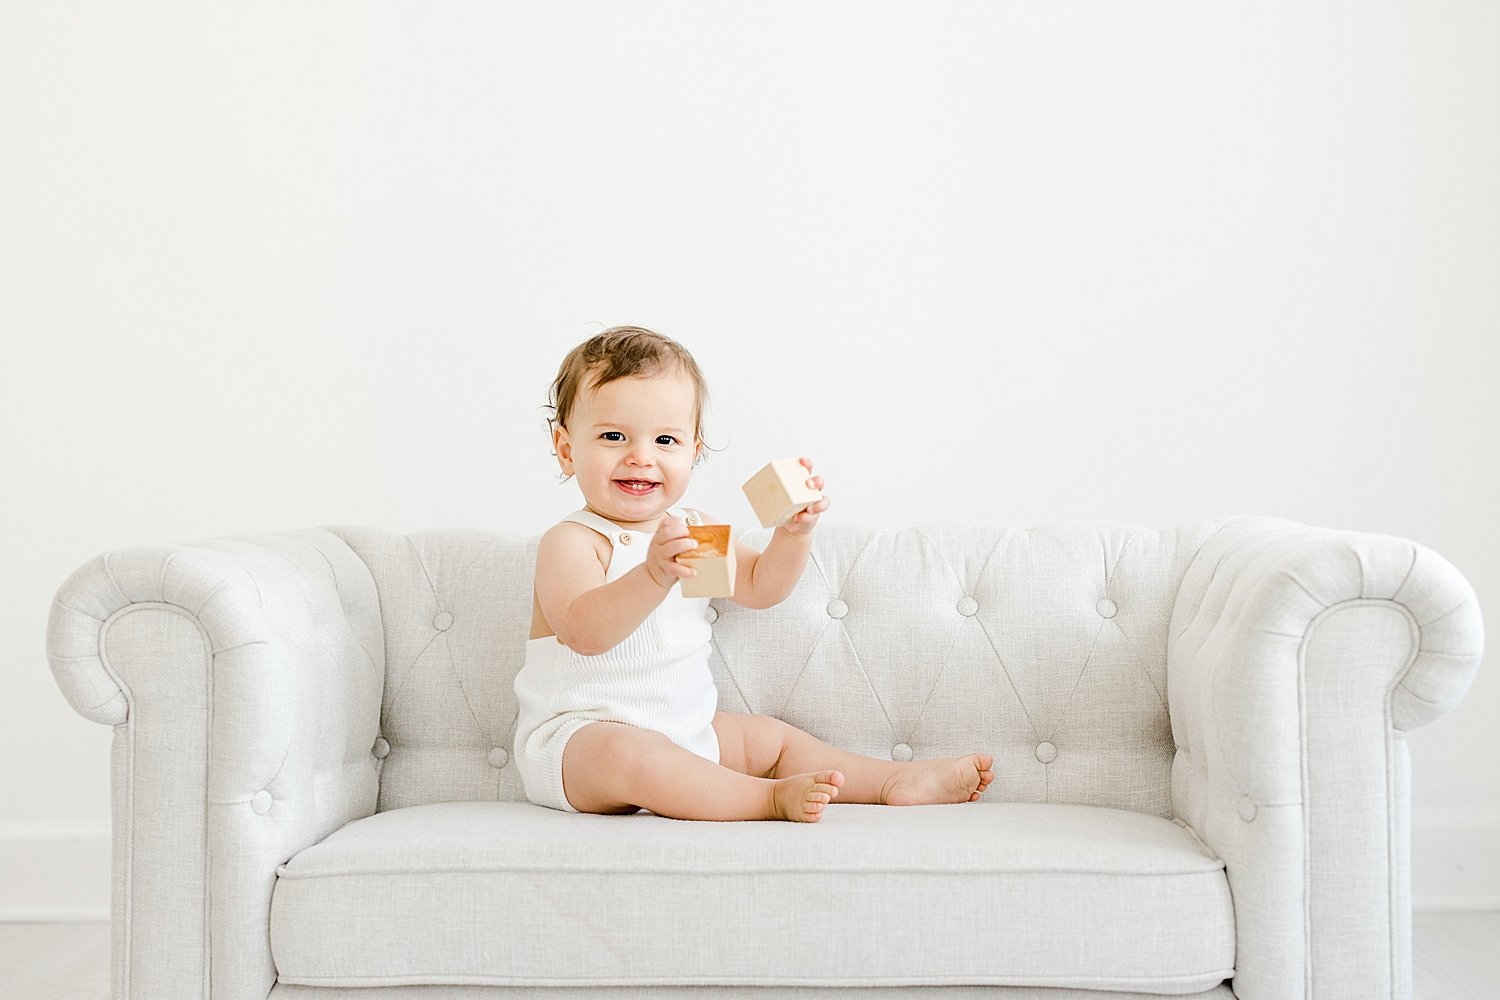 Why You Should Hire a Photographer for Your Baby's First Year | First birthday session for baby boy in studio in Westport, CT | Kristin Wood Photography